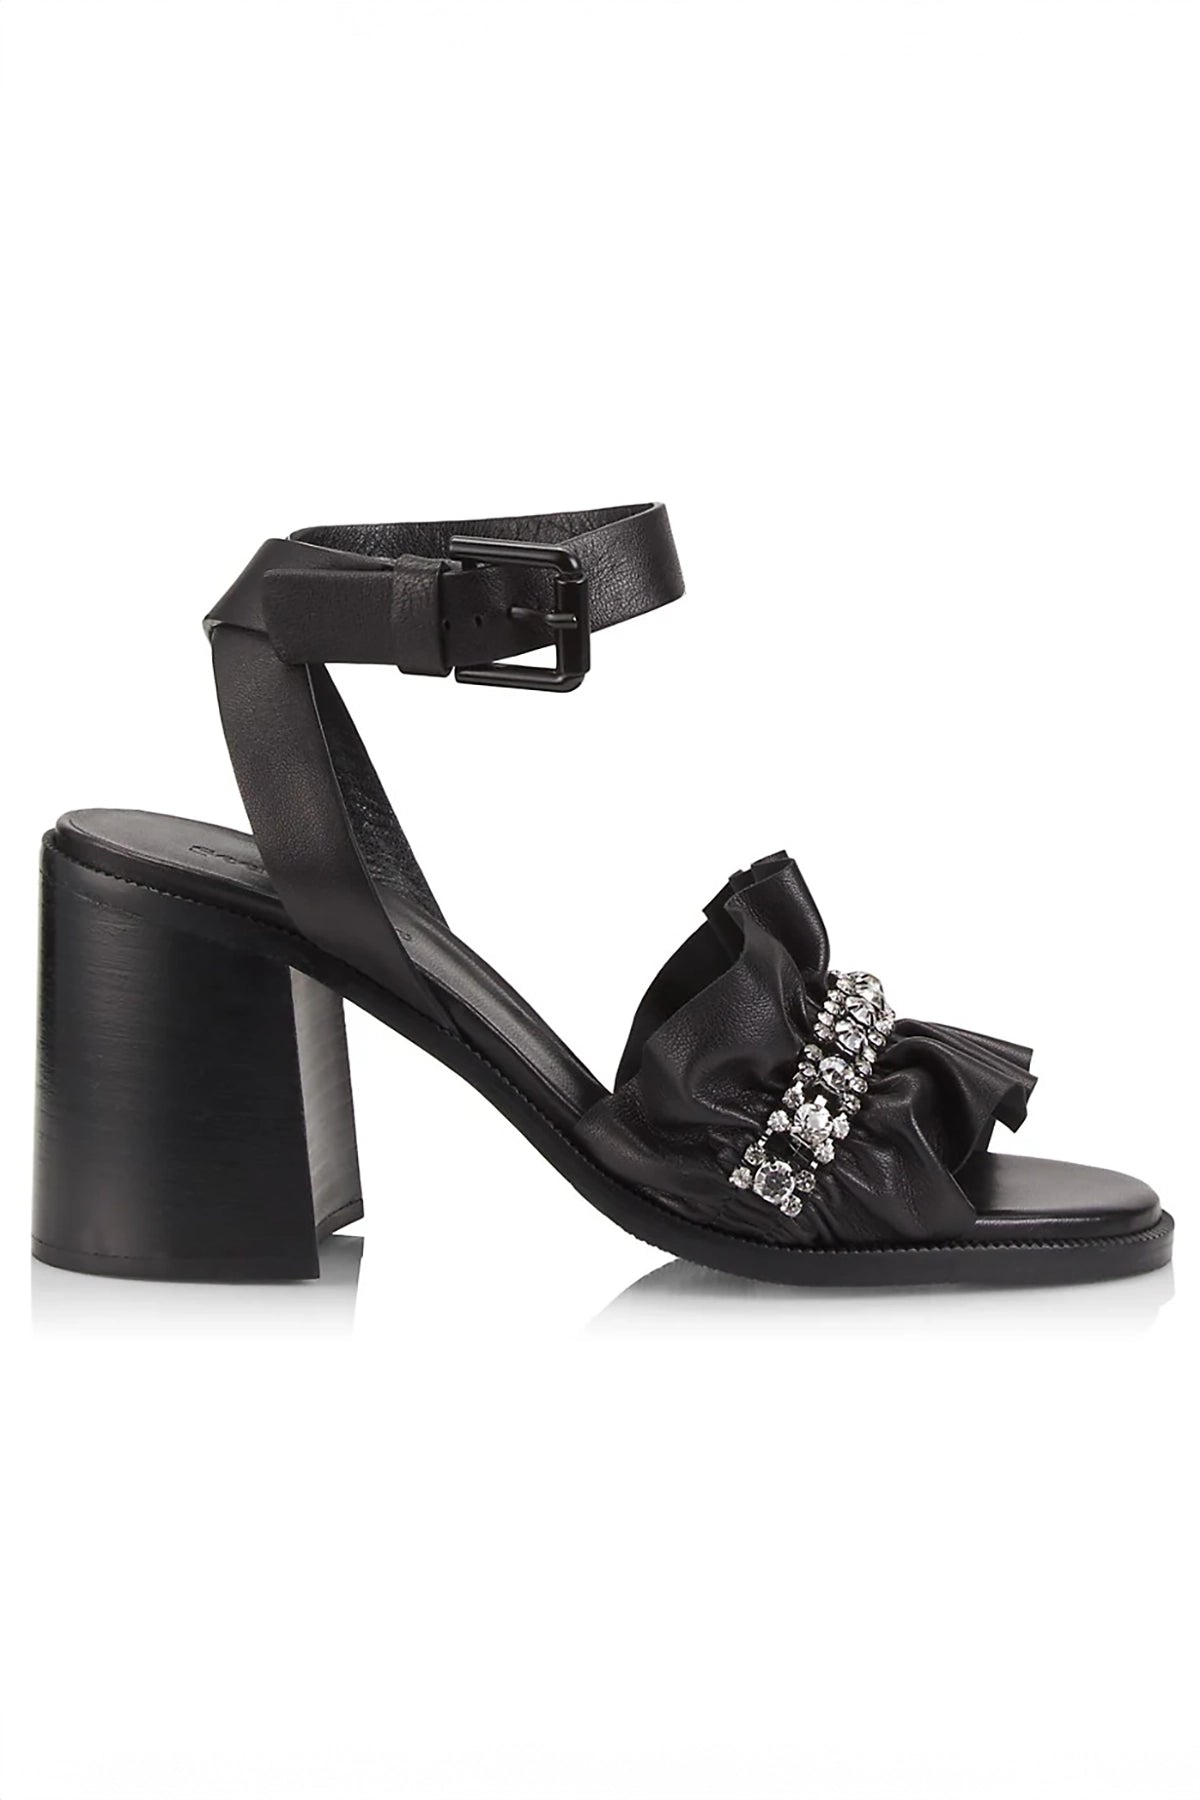 See By Chloe Mollie Sandals